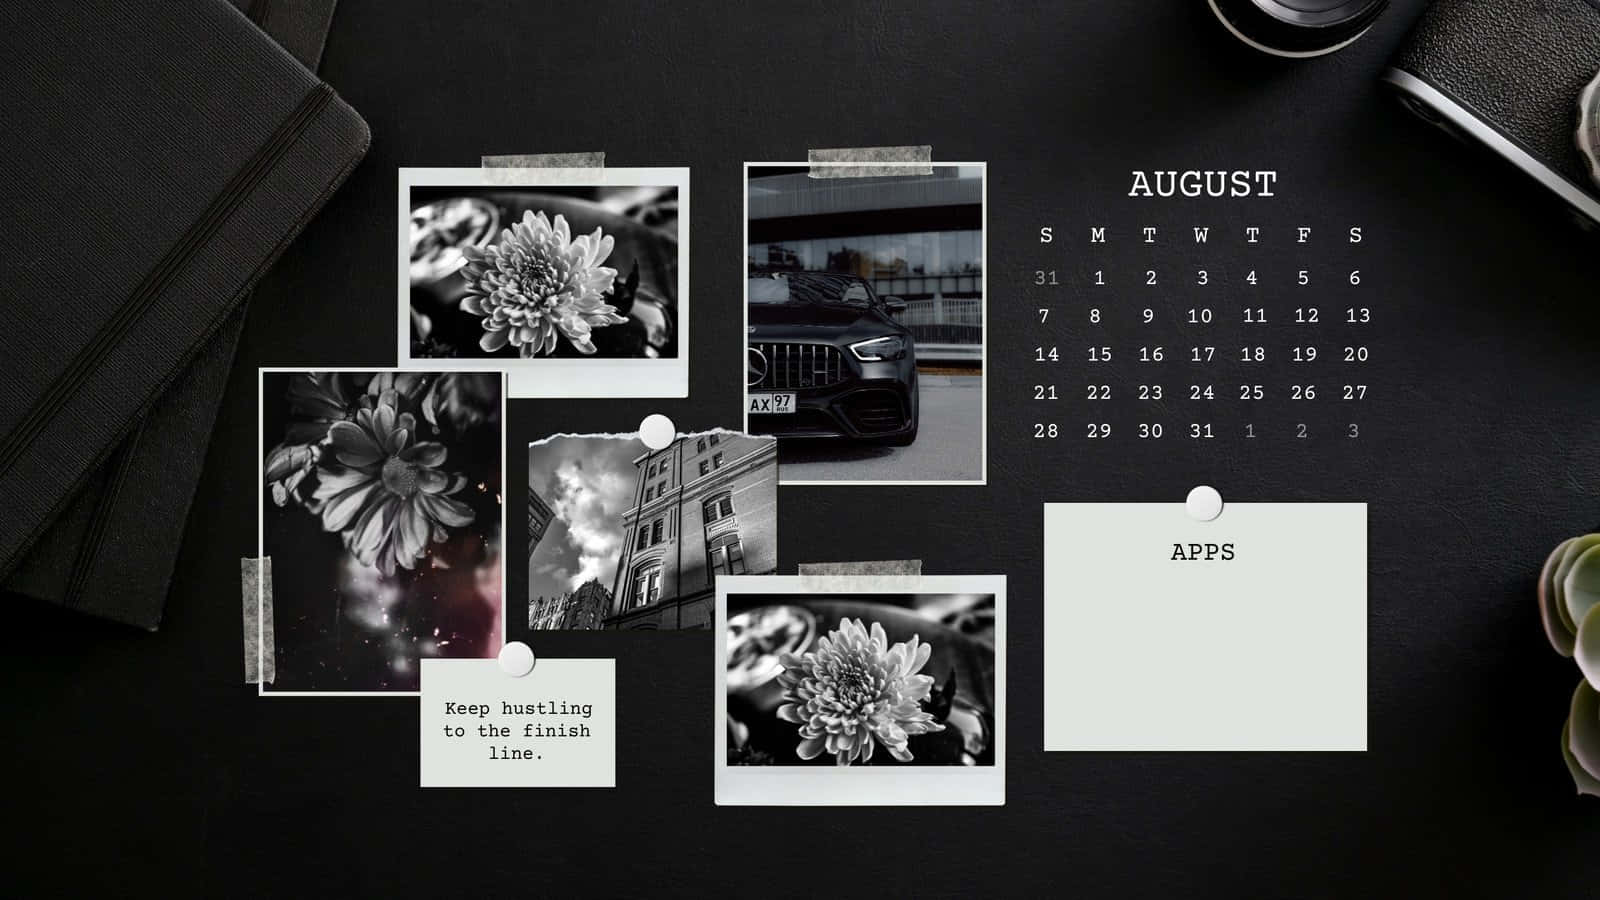 August Calendar With Photographs Black Aesthetic Background